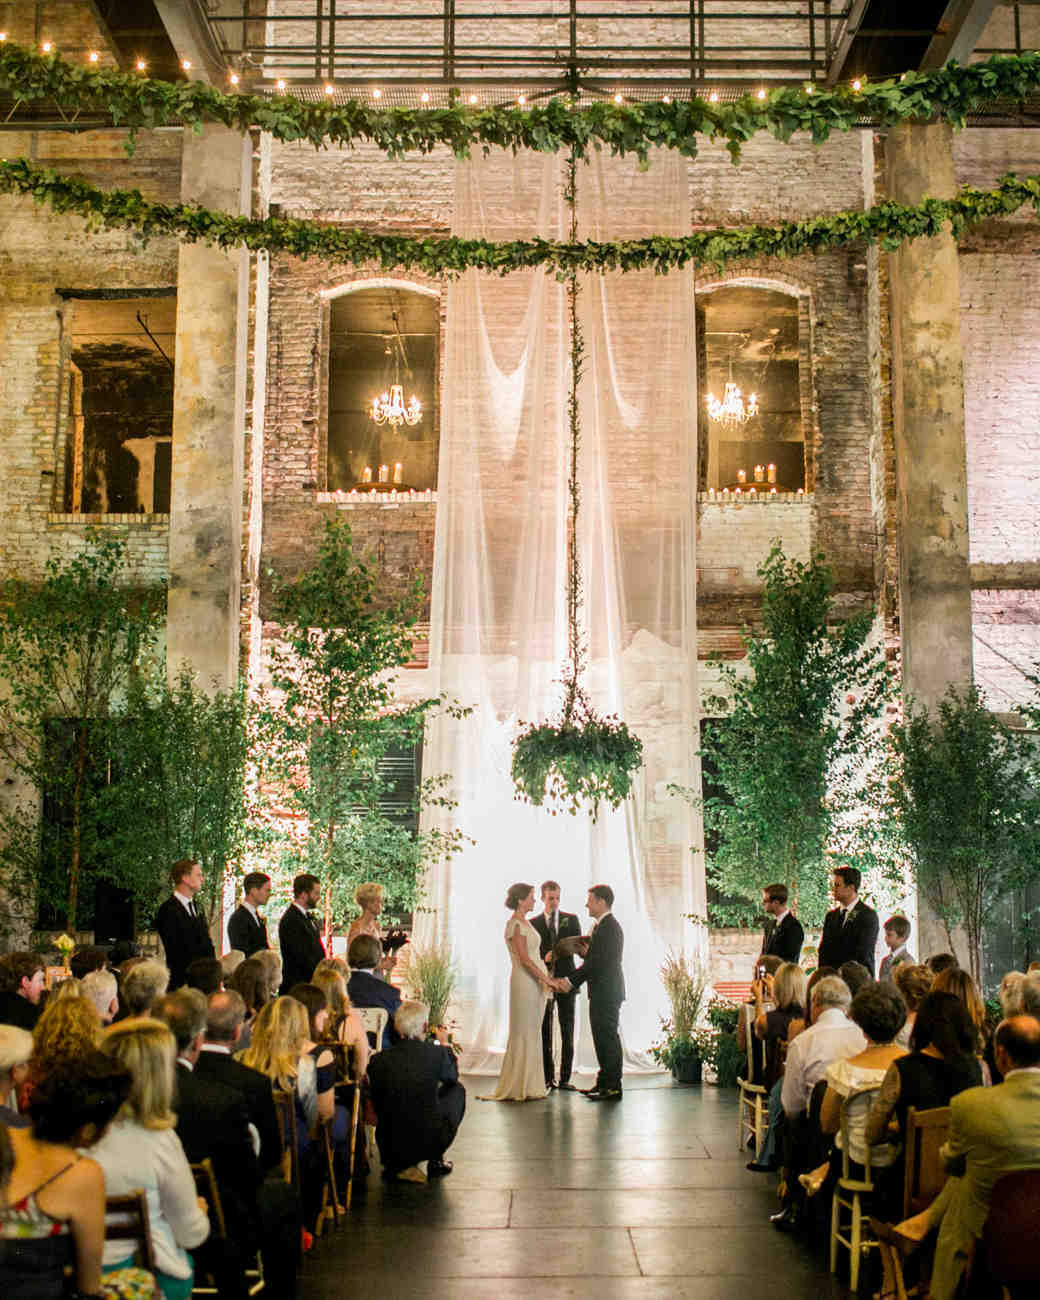 Venues For Weddings
 Restored Warehouses Where You Can Tie the Knot